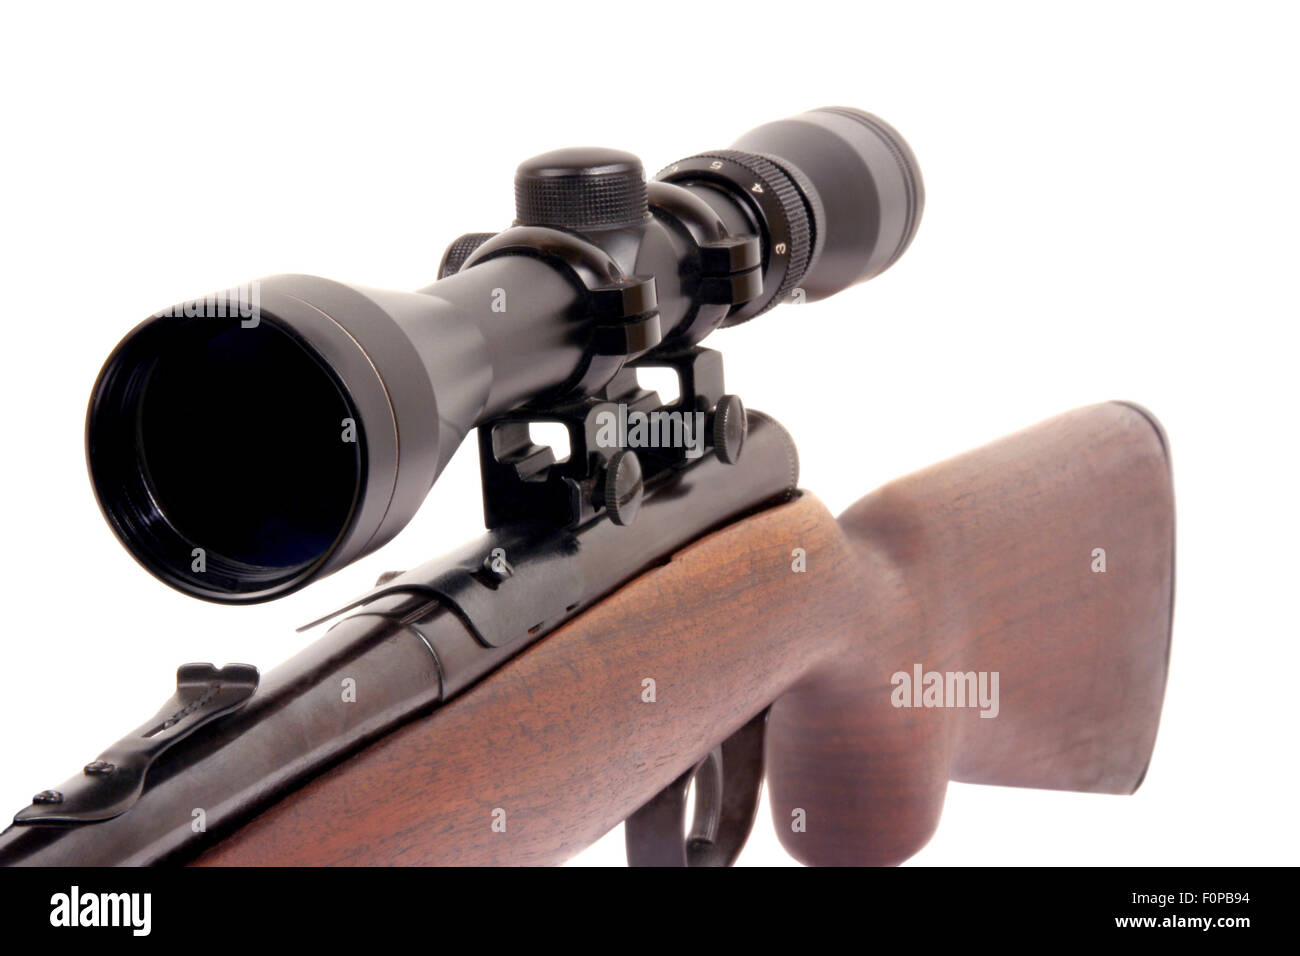 Macro shot of a rifle with a scope on top Stock Photo